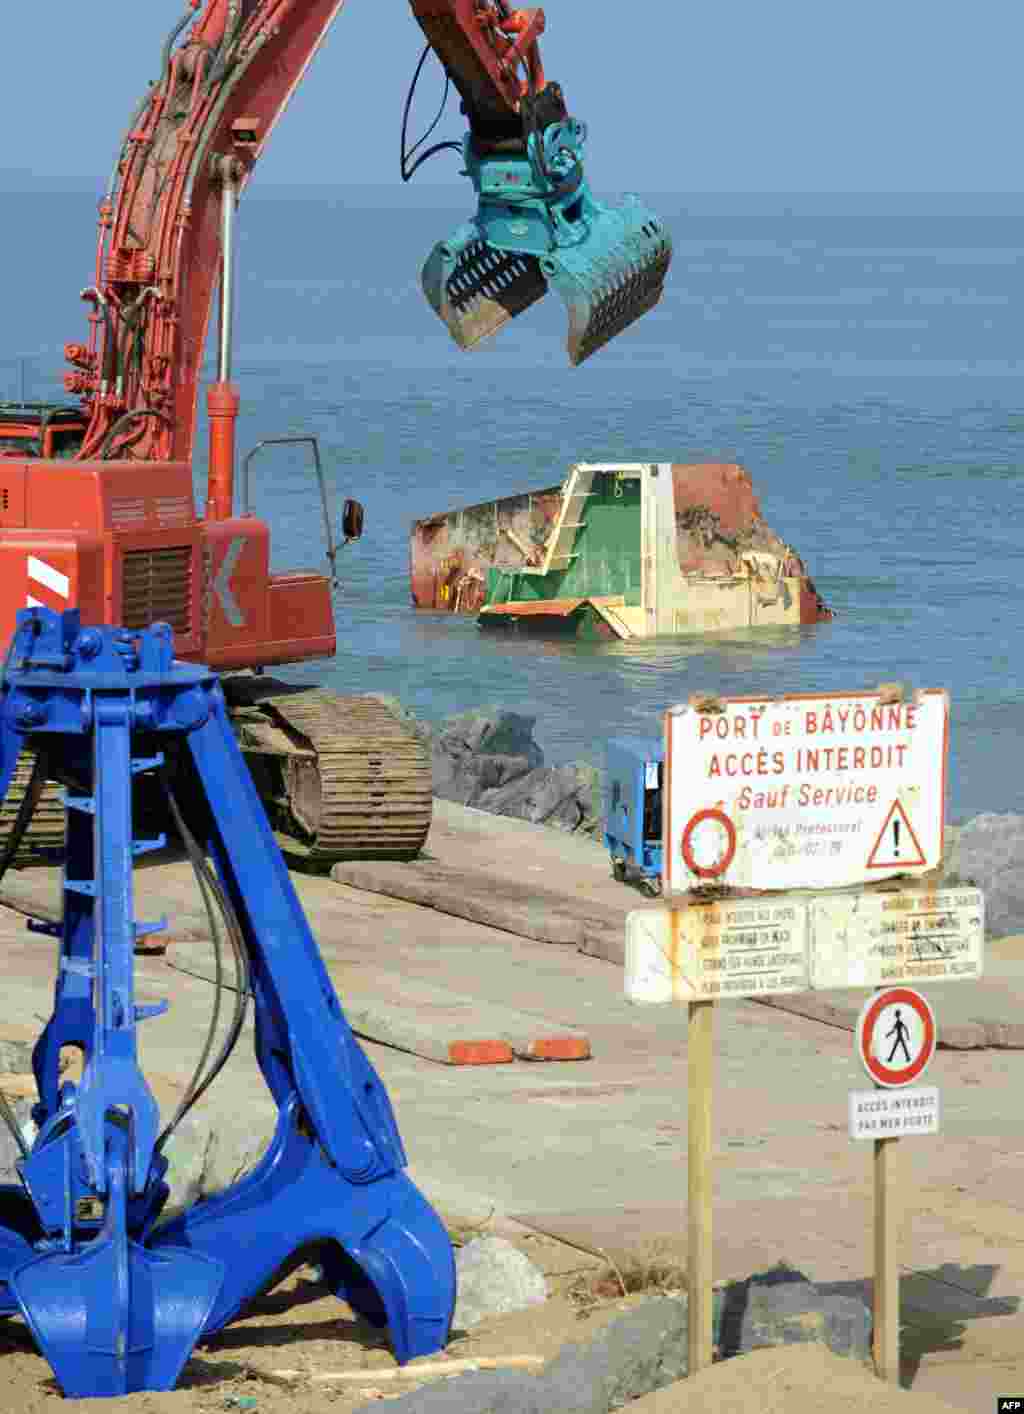 Picture shows cranes and part of the wreckage of the Spanish cargo ship &#39;Luno&#39; in Anglet, southwestern France, during the dismantling of the ship which has broken into three sections after a shipwreck in February 2014. The 20-year-old Spanish vessel split in two when winds and waves smashed it up against an artificial breakwater on February 5. The crew of 11 were rescued by helicopter in perilous conditions.